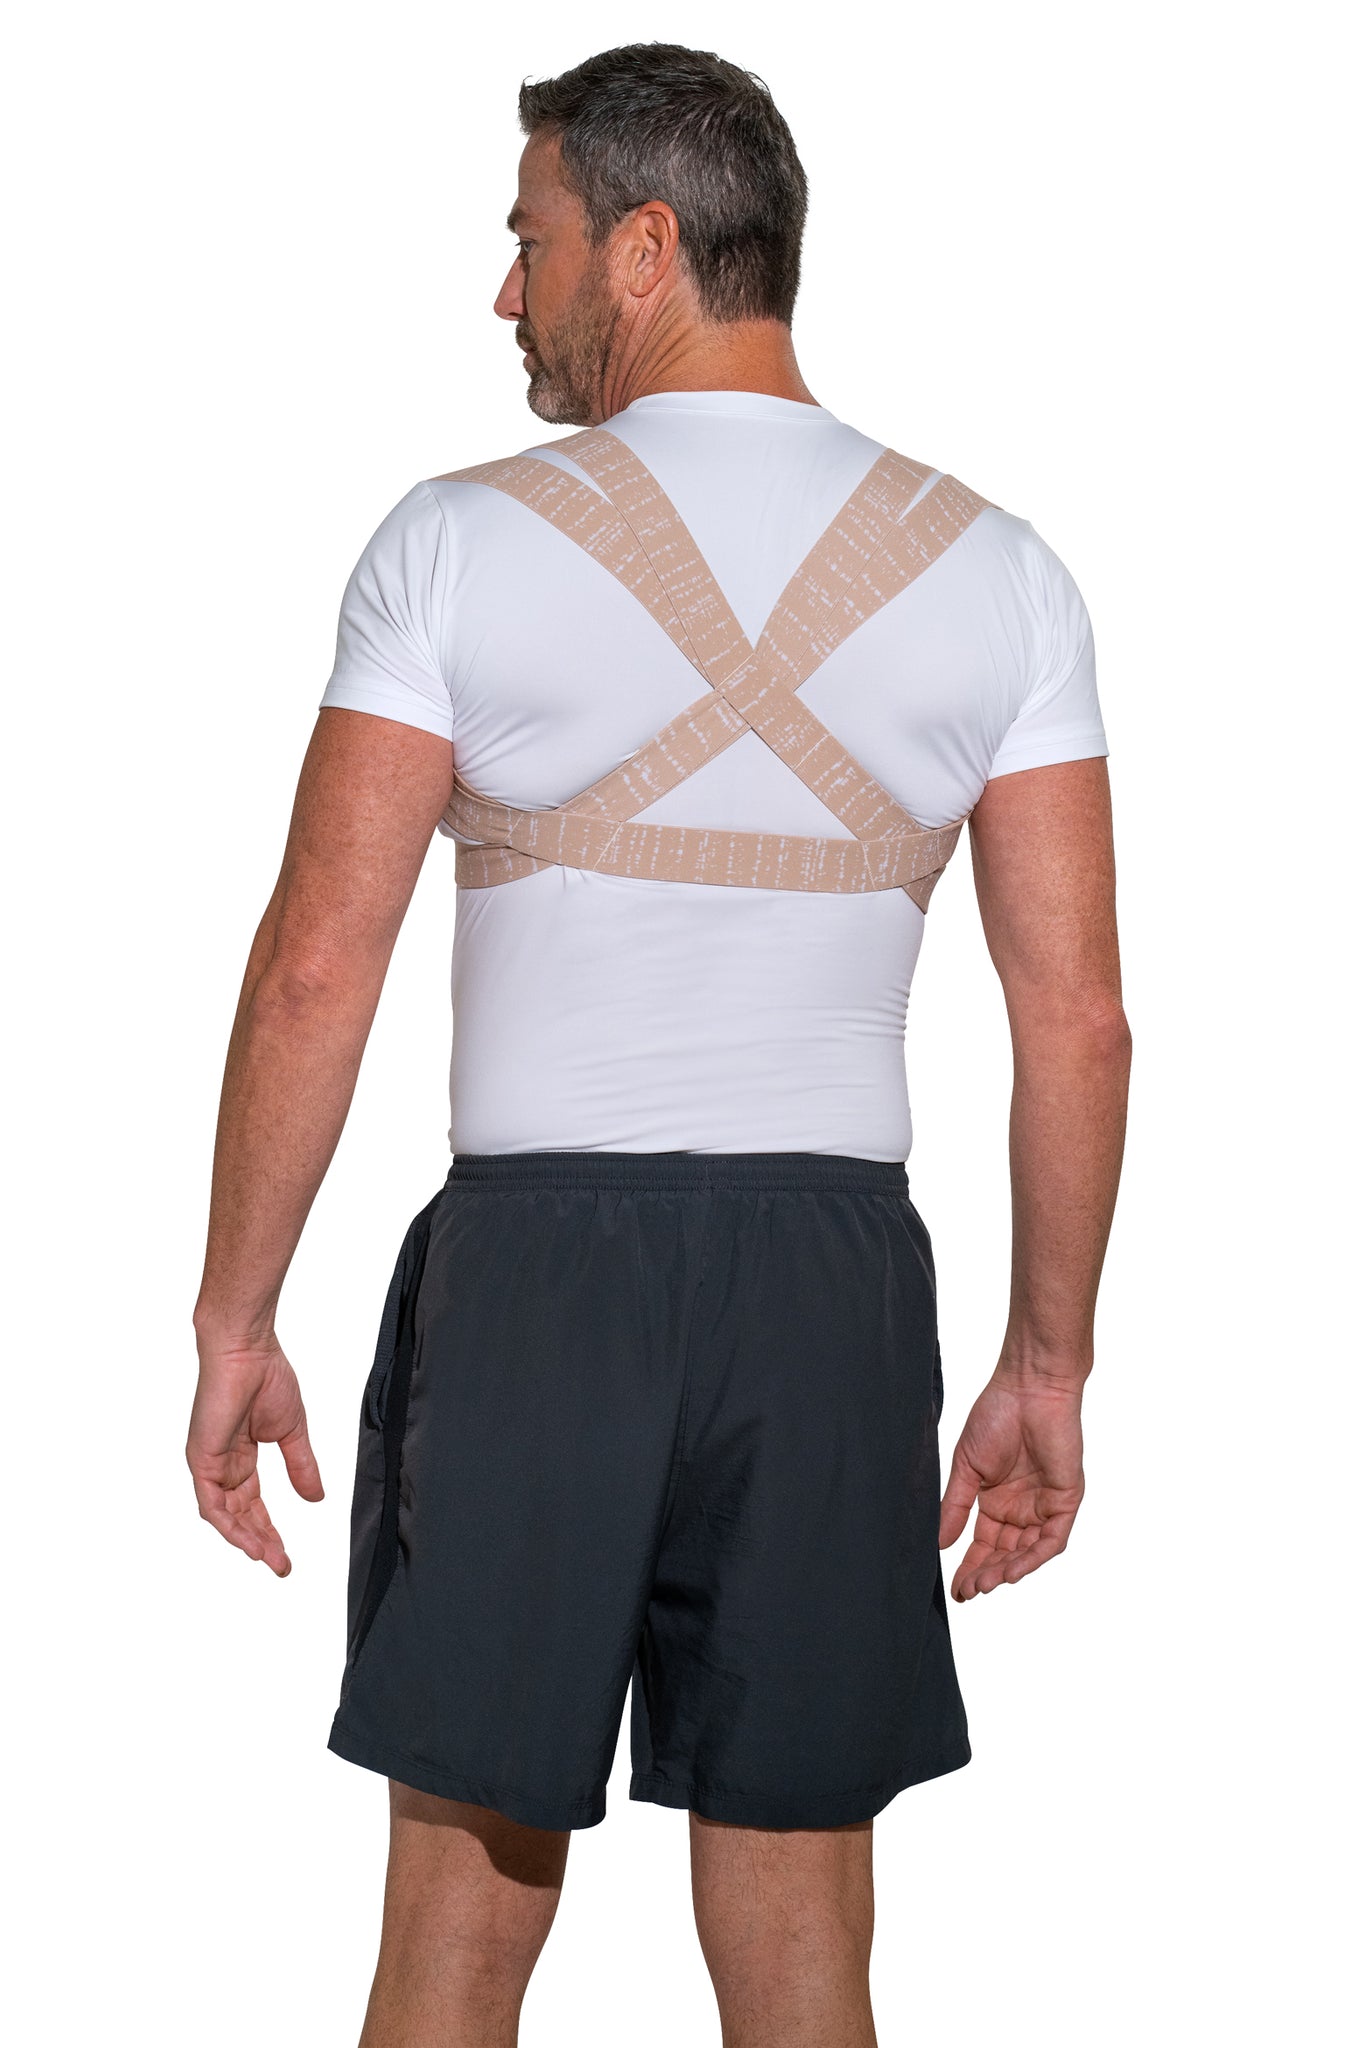 Back Brace and Posture Corrector for Women and Men